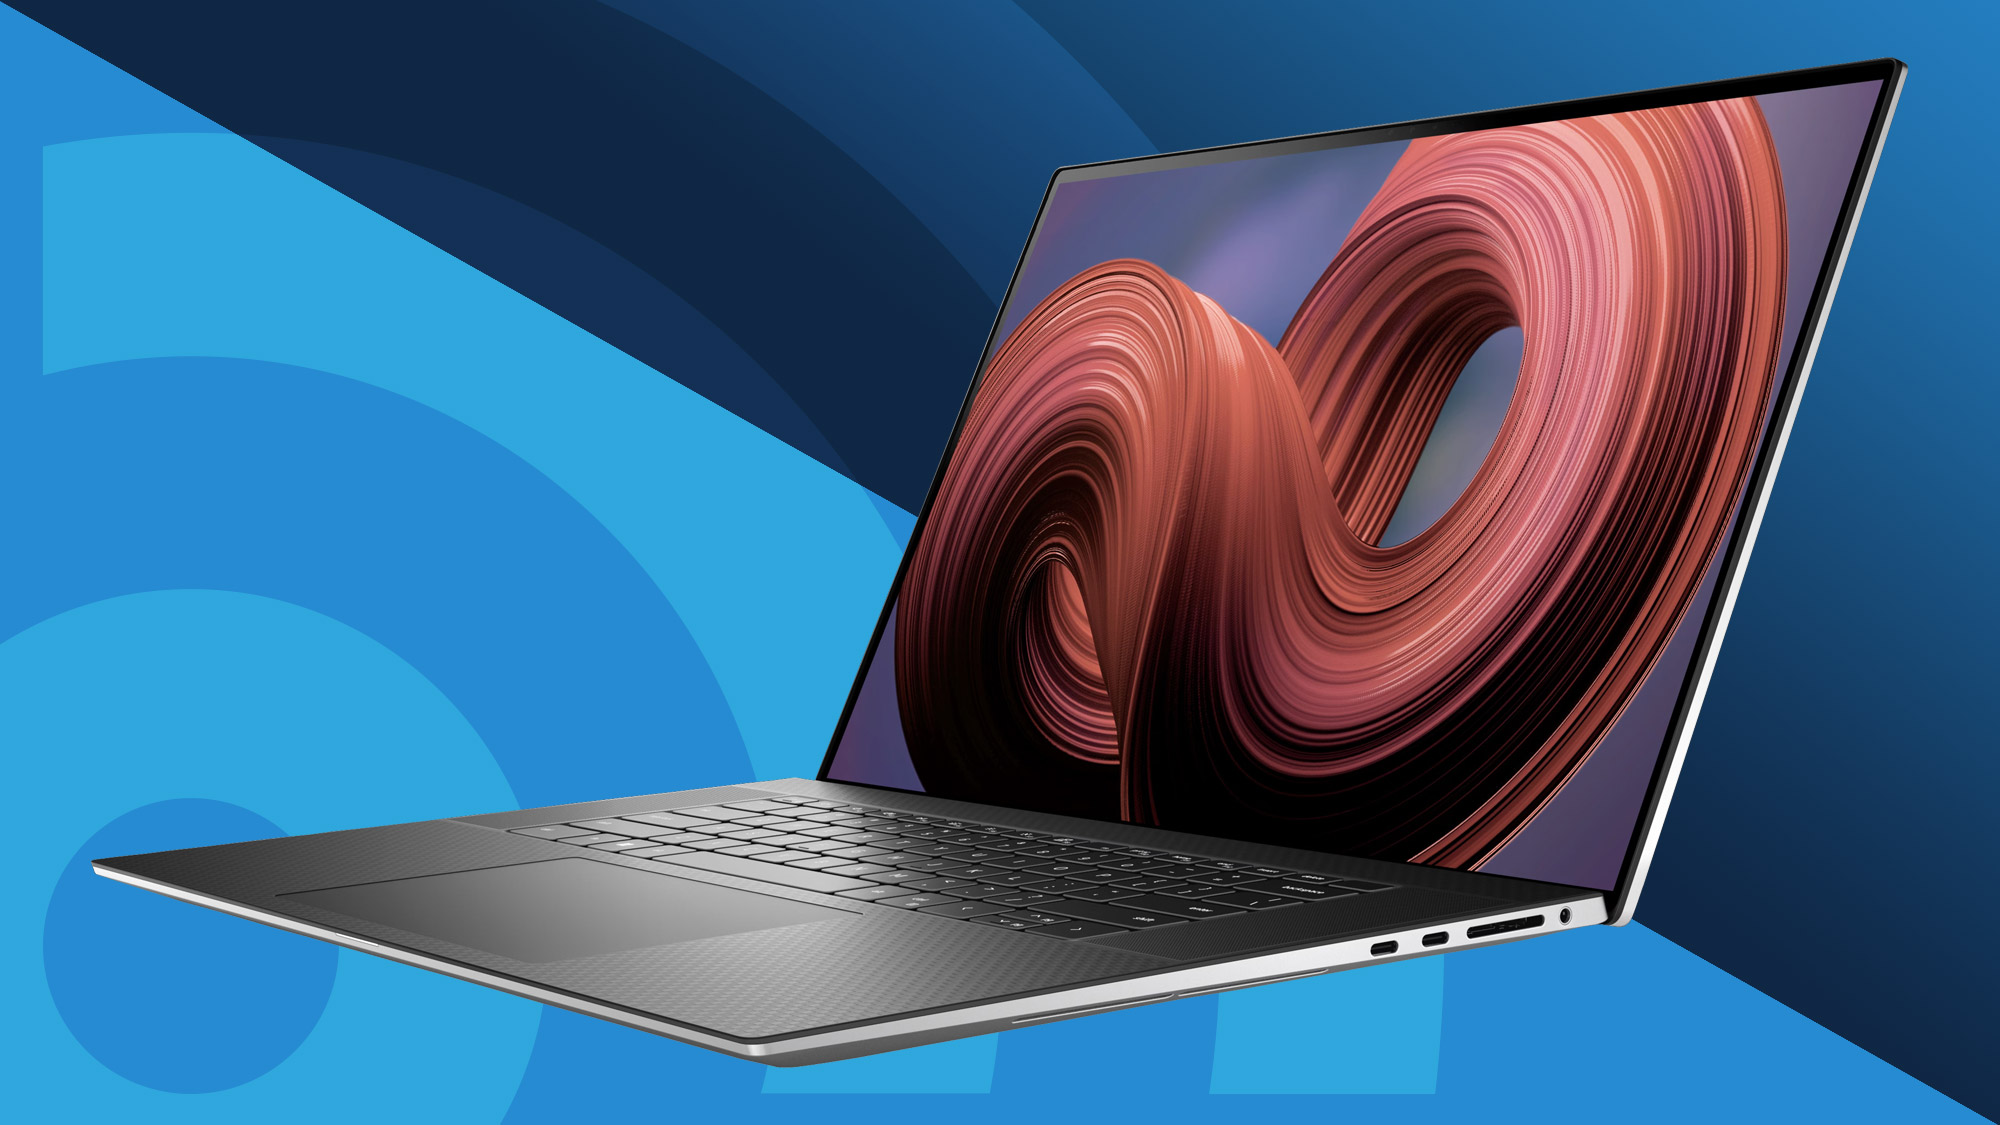 Bigger, Better!, HP 17 Inch, HP Notebook Review